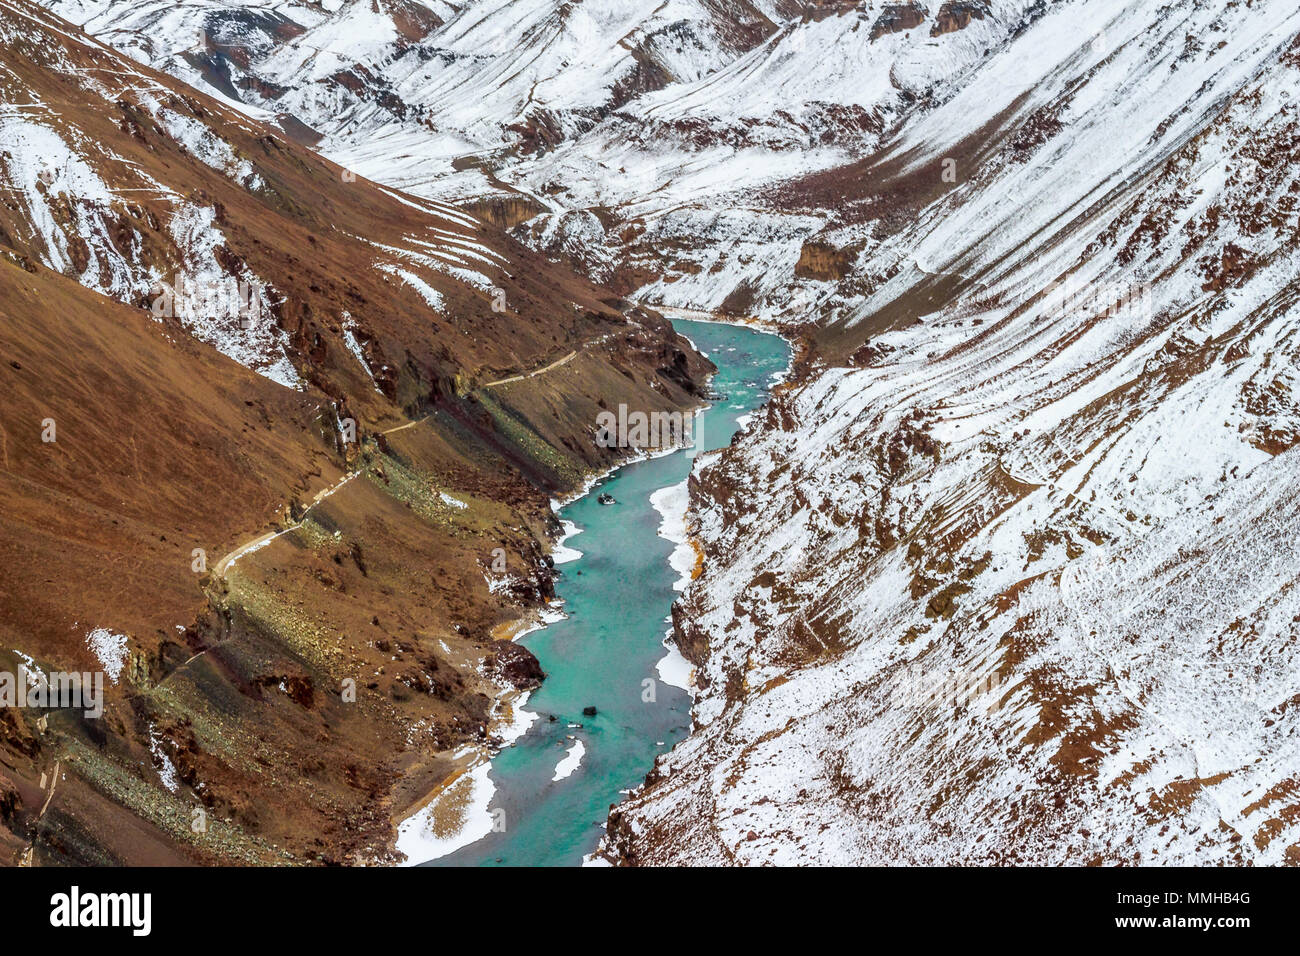 Indus river flowing through the snow capped mountains of Himalayas (Ladakh Range ) on one side and other side with a barren mountain. Stock Photo